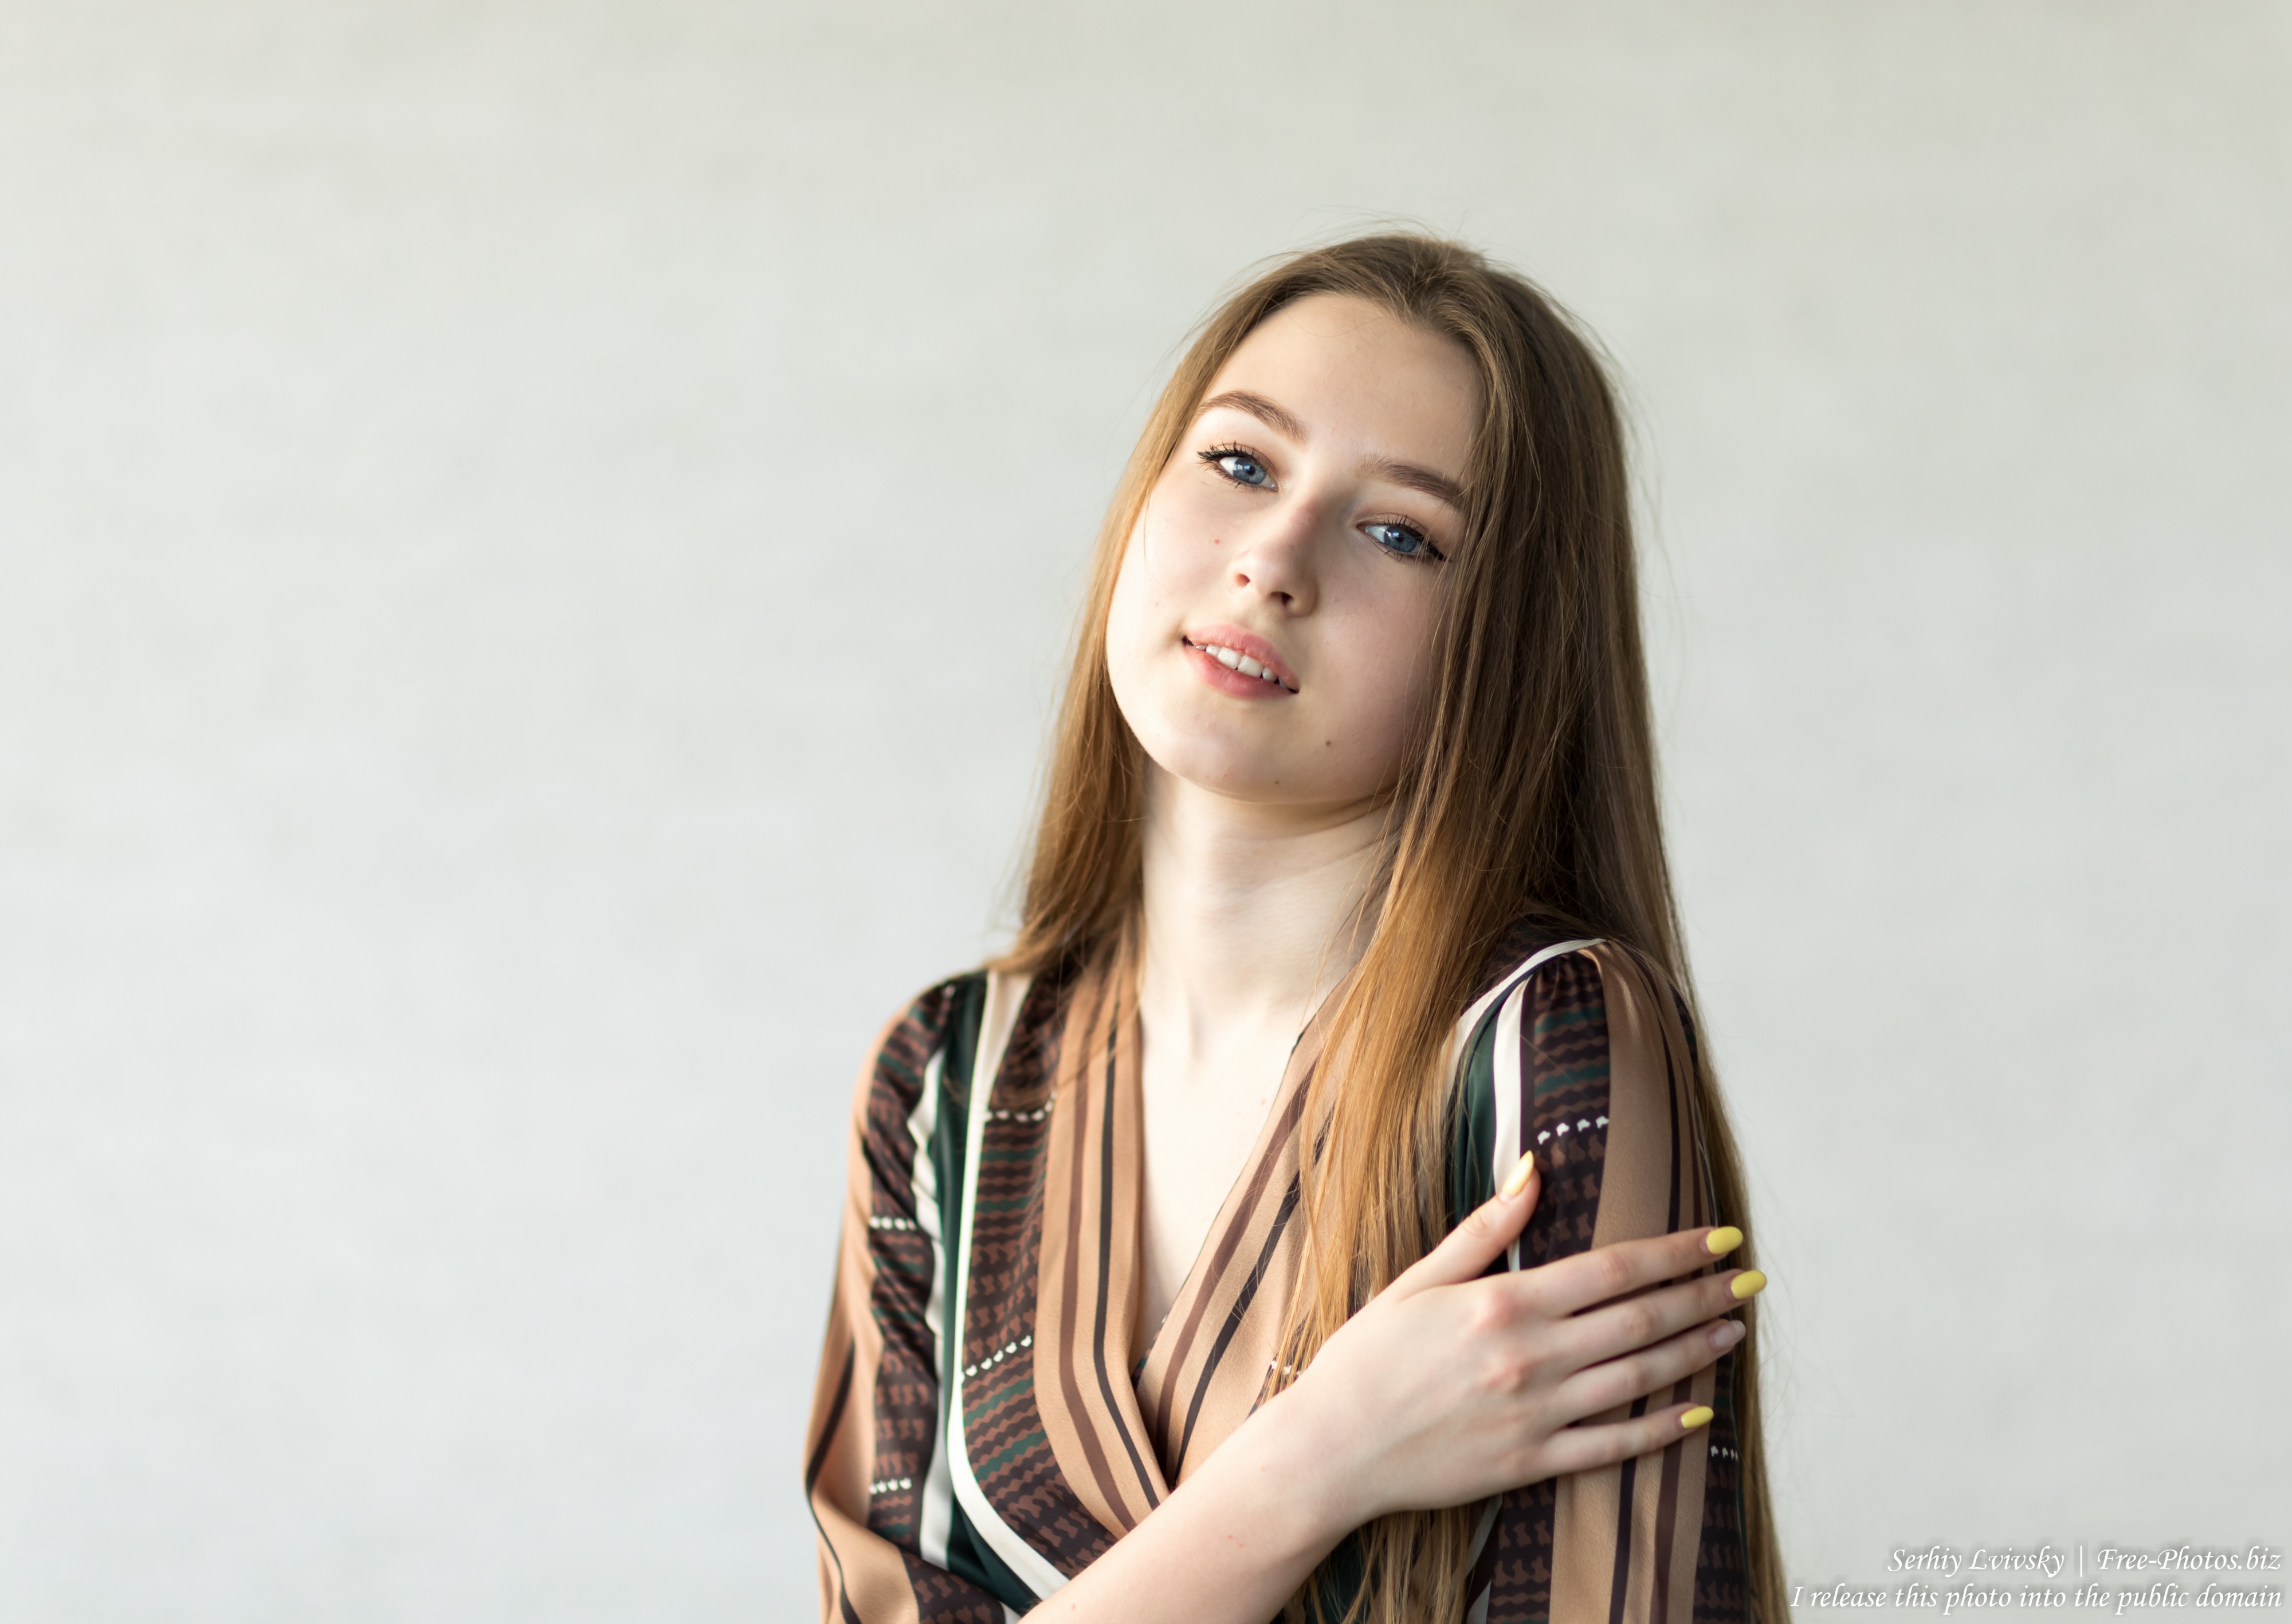 Photo Of Vika A 17 Year Old Girl With Blue Eyes And Natural Fair Hair Photographed In June